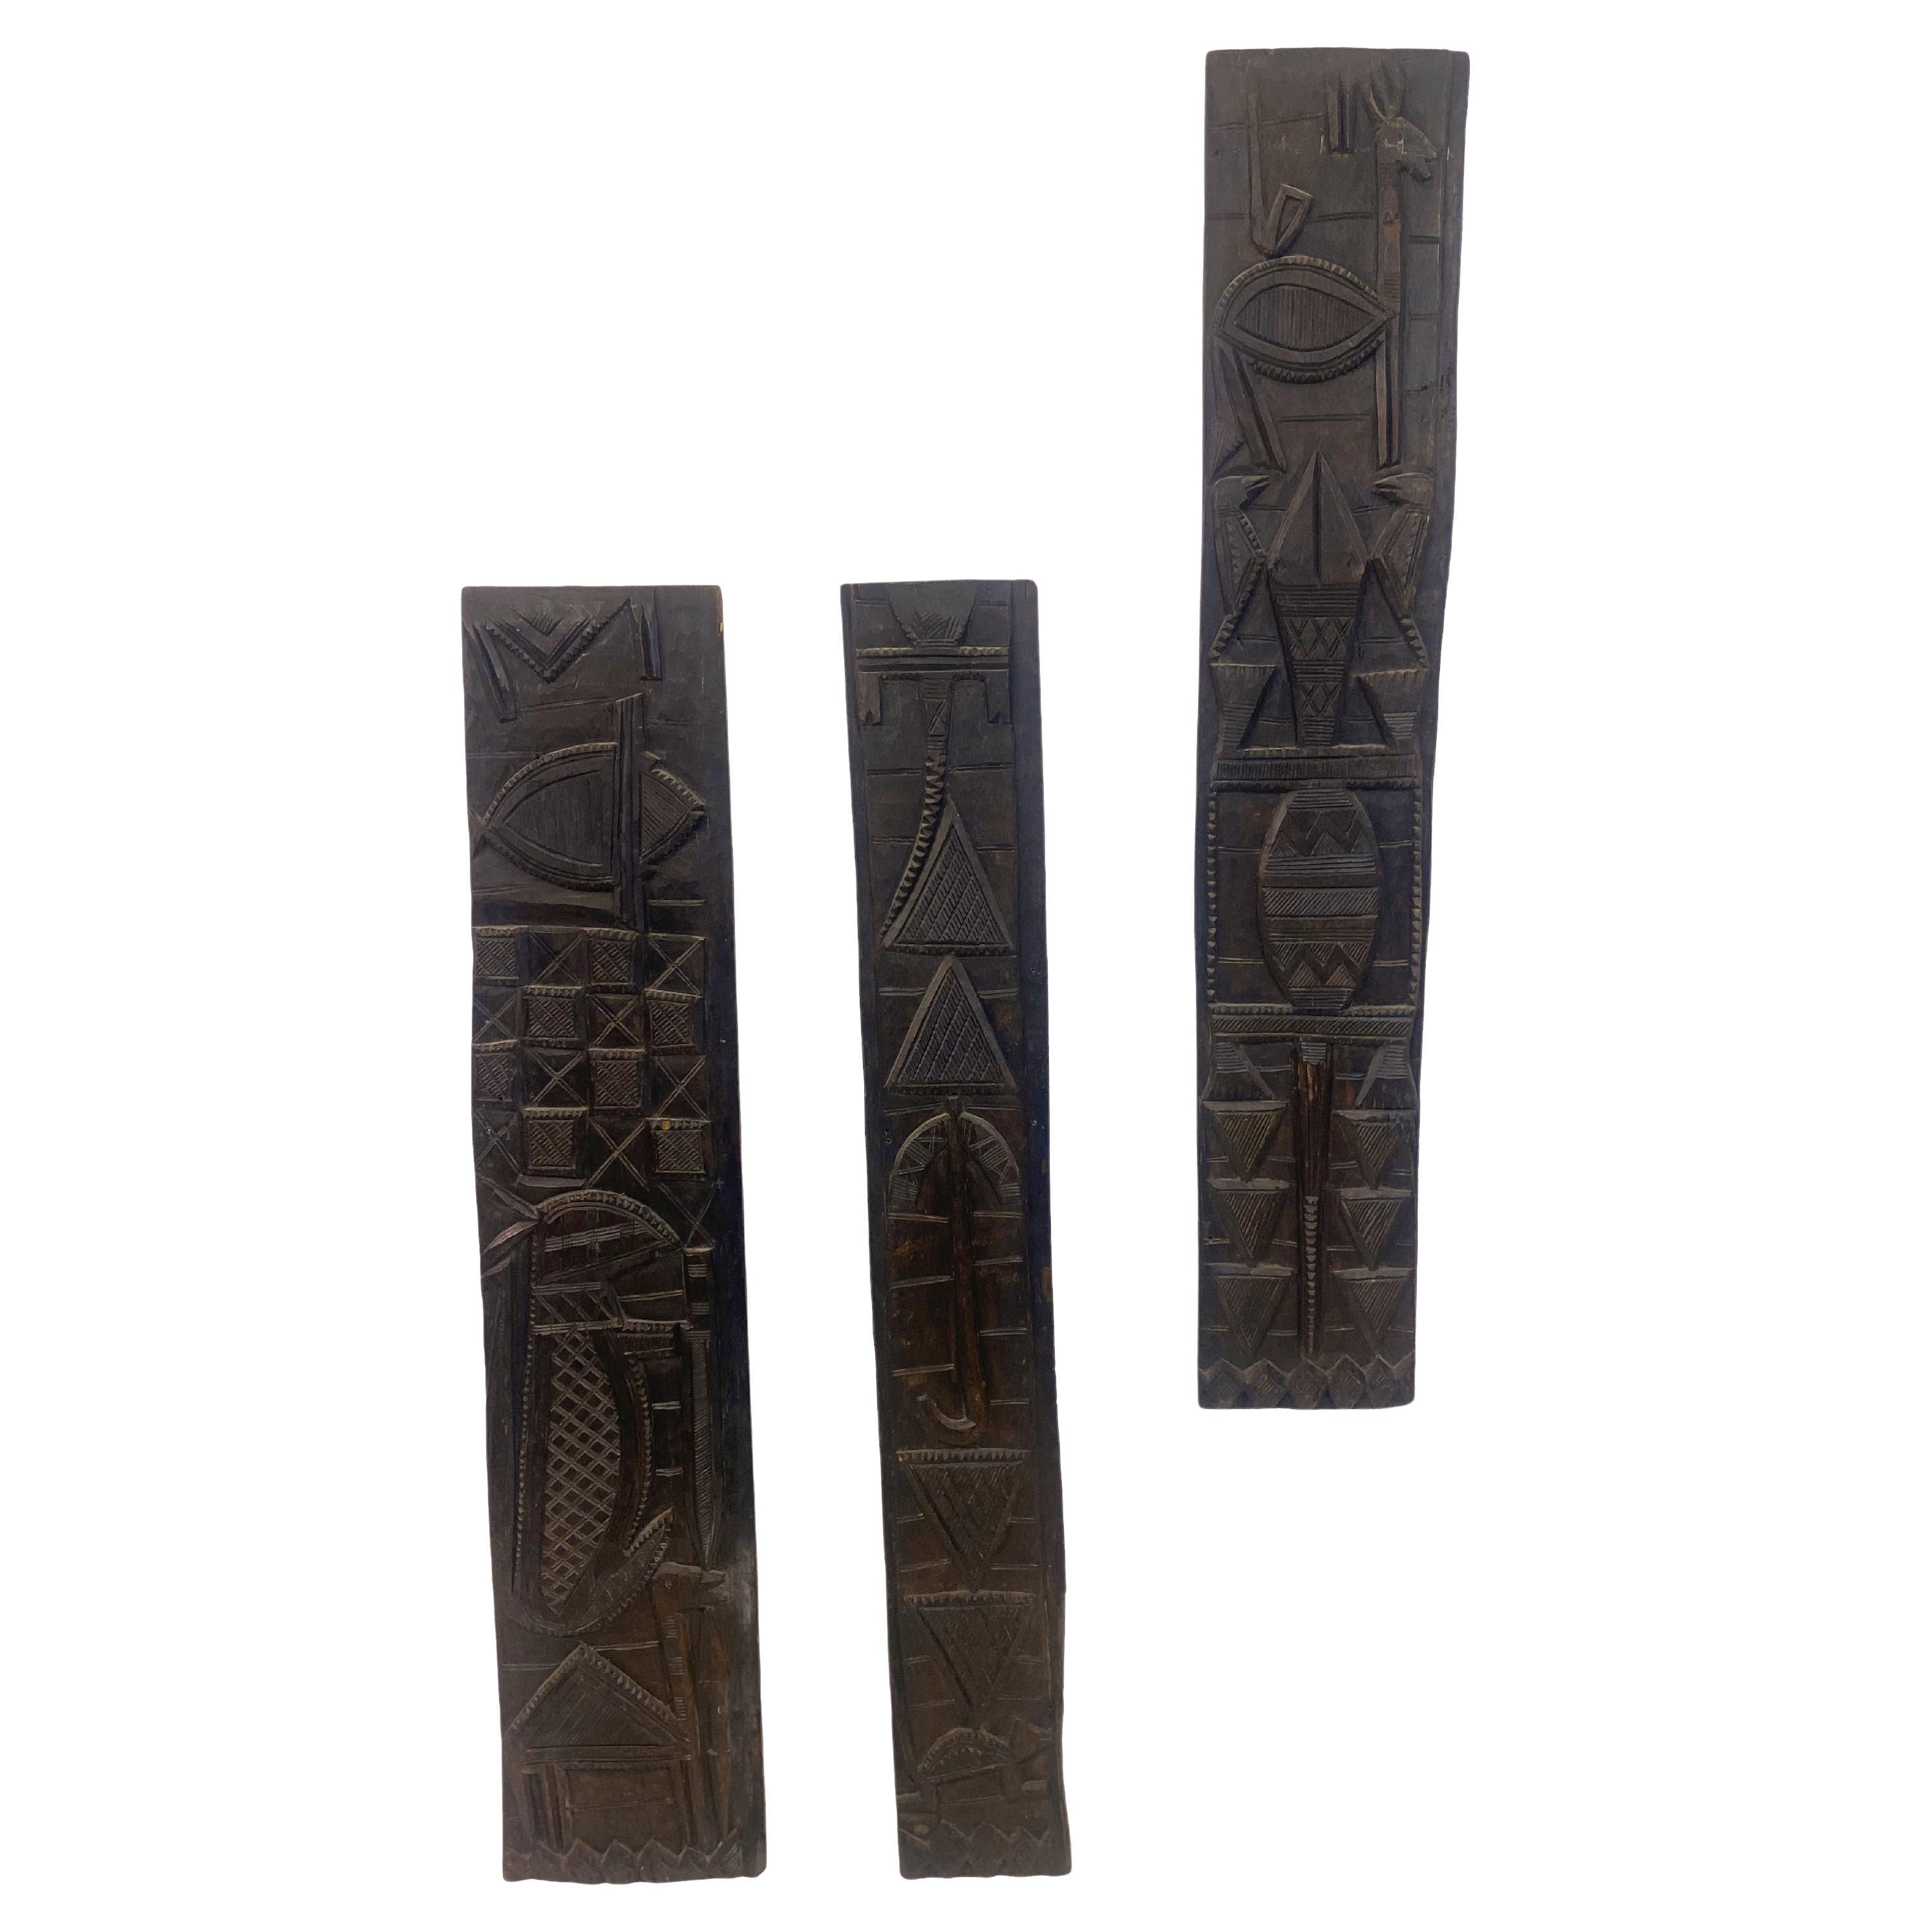 Carved African Wood Door Panel Wall Plaques For Sale